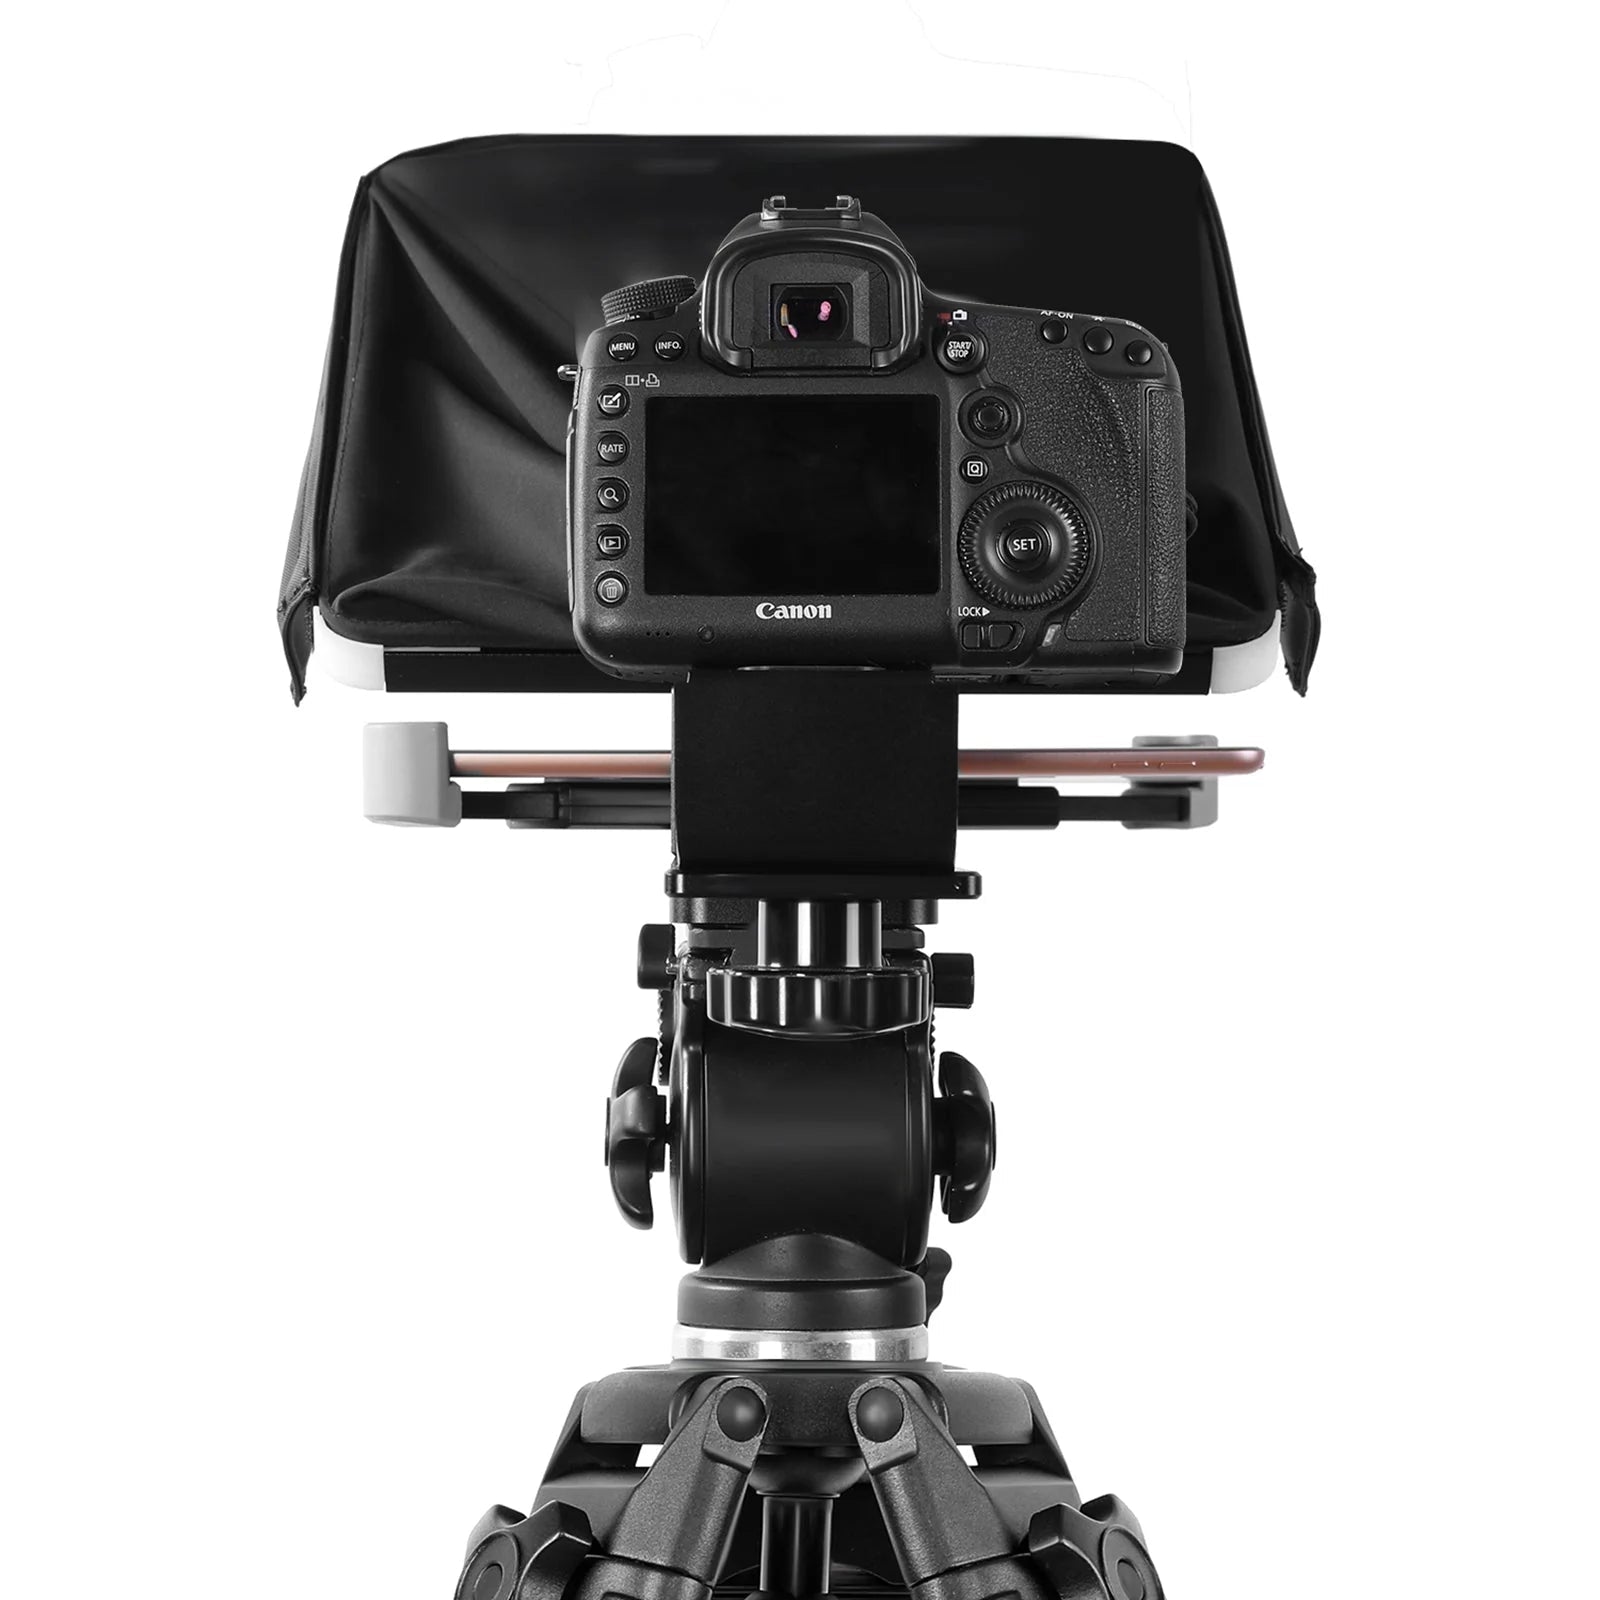 GVM Teleprompter TQ-M for Tablets and Smartphones with Remote Control & App - mylensball.com.au